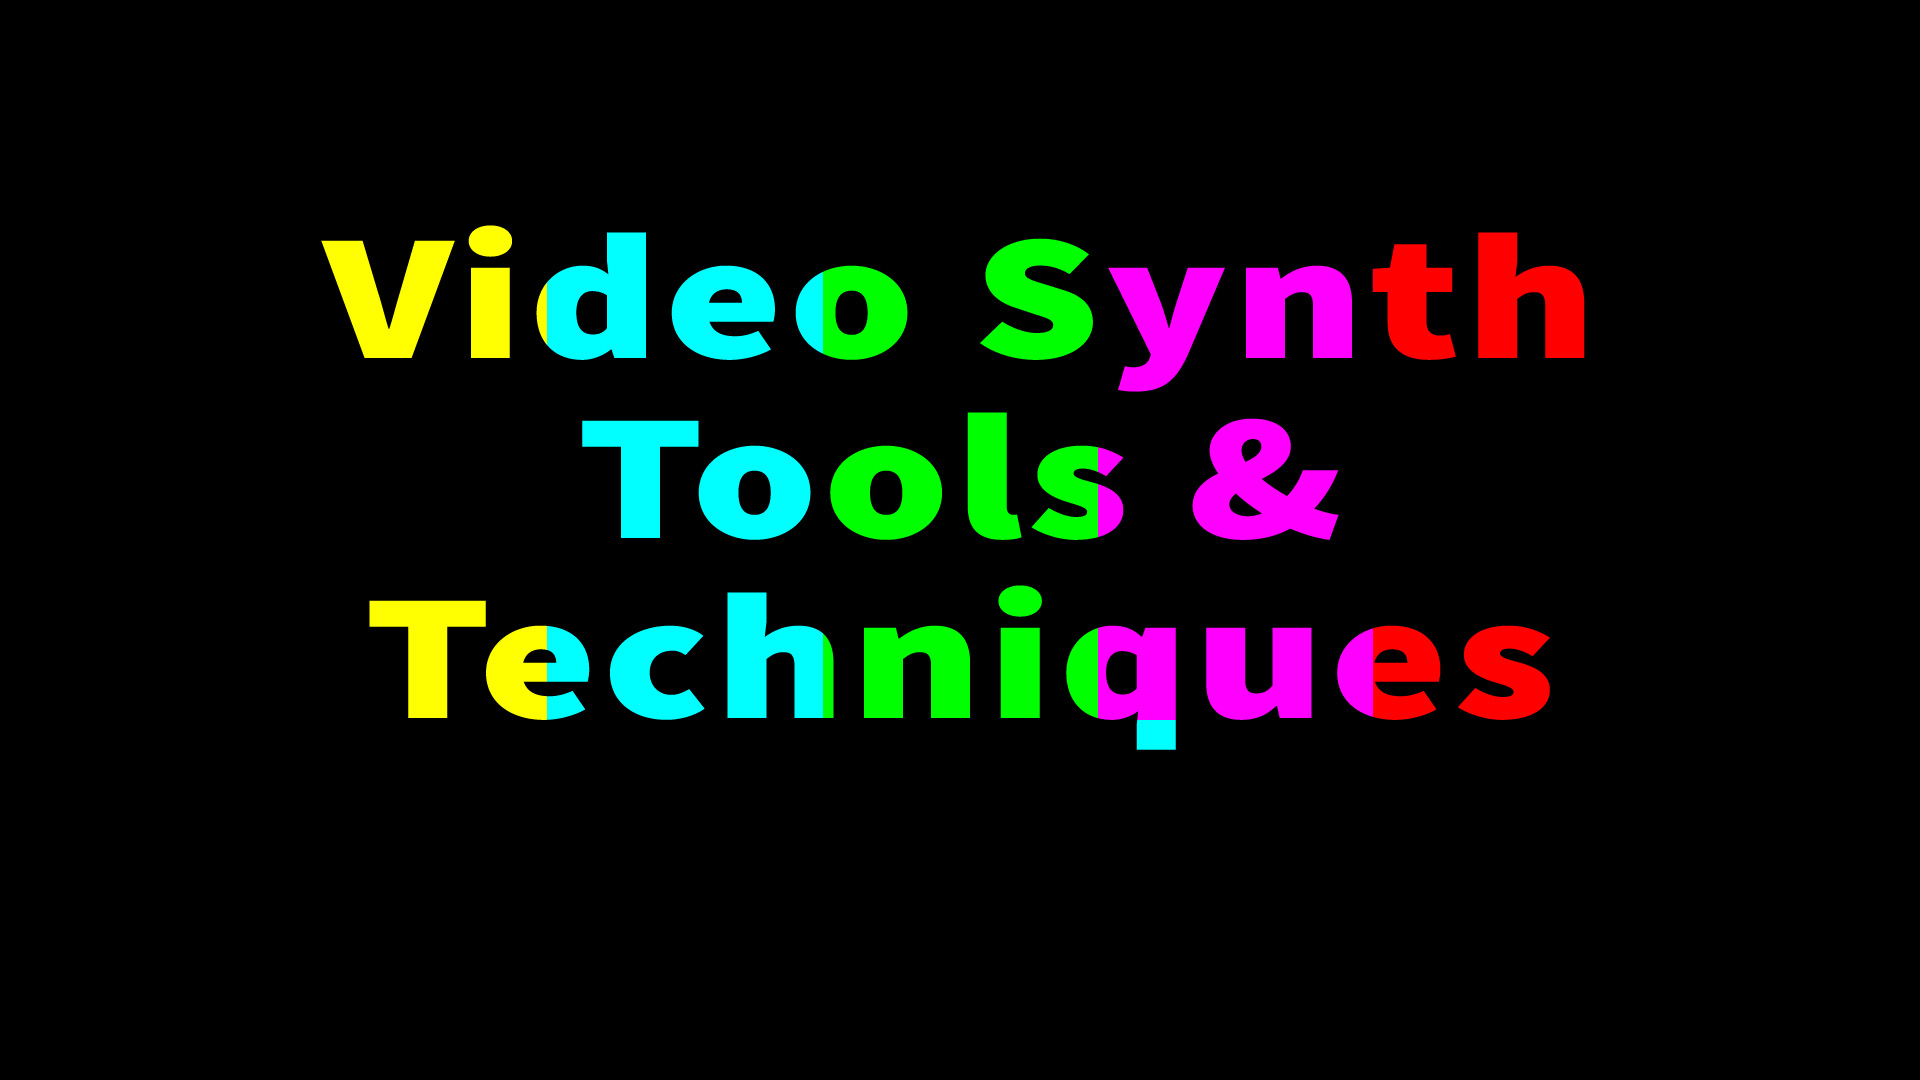 Video Synth Tools & Techniques